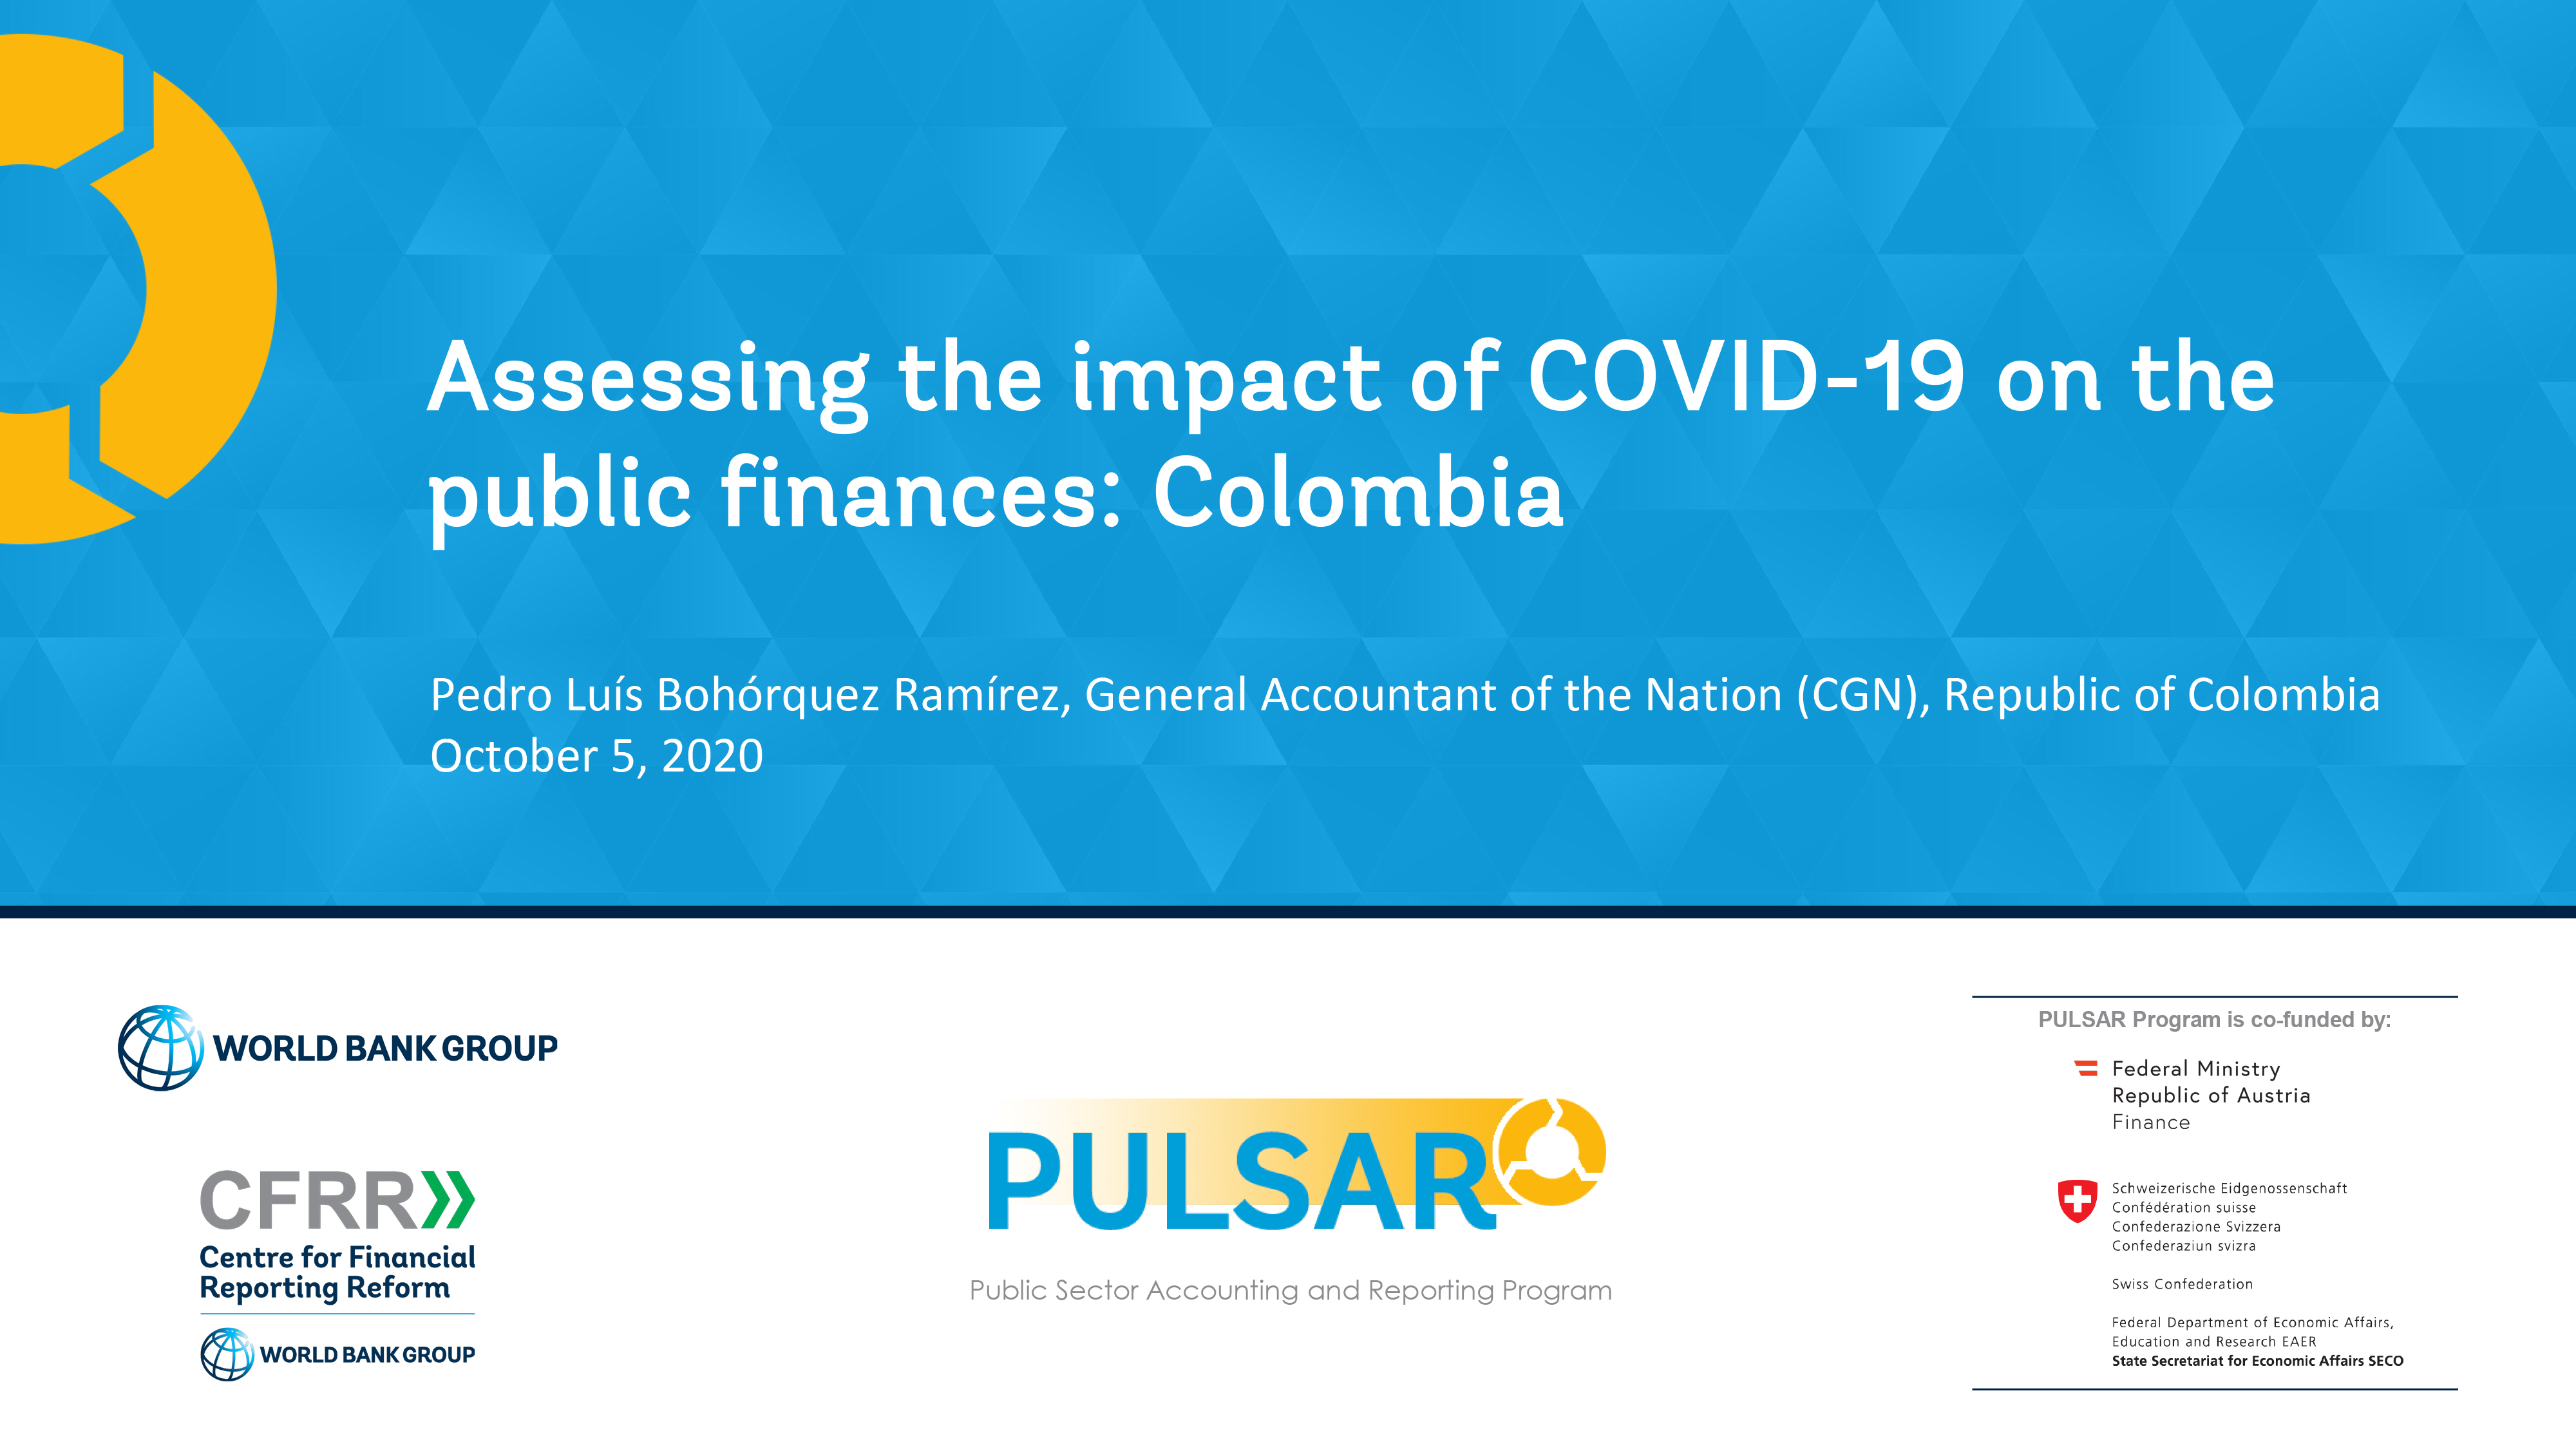 Assessing the impact of COVID-19 on the public finances: Colombia